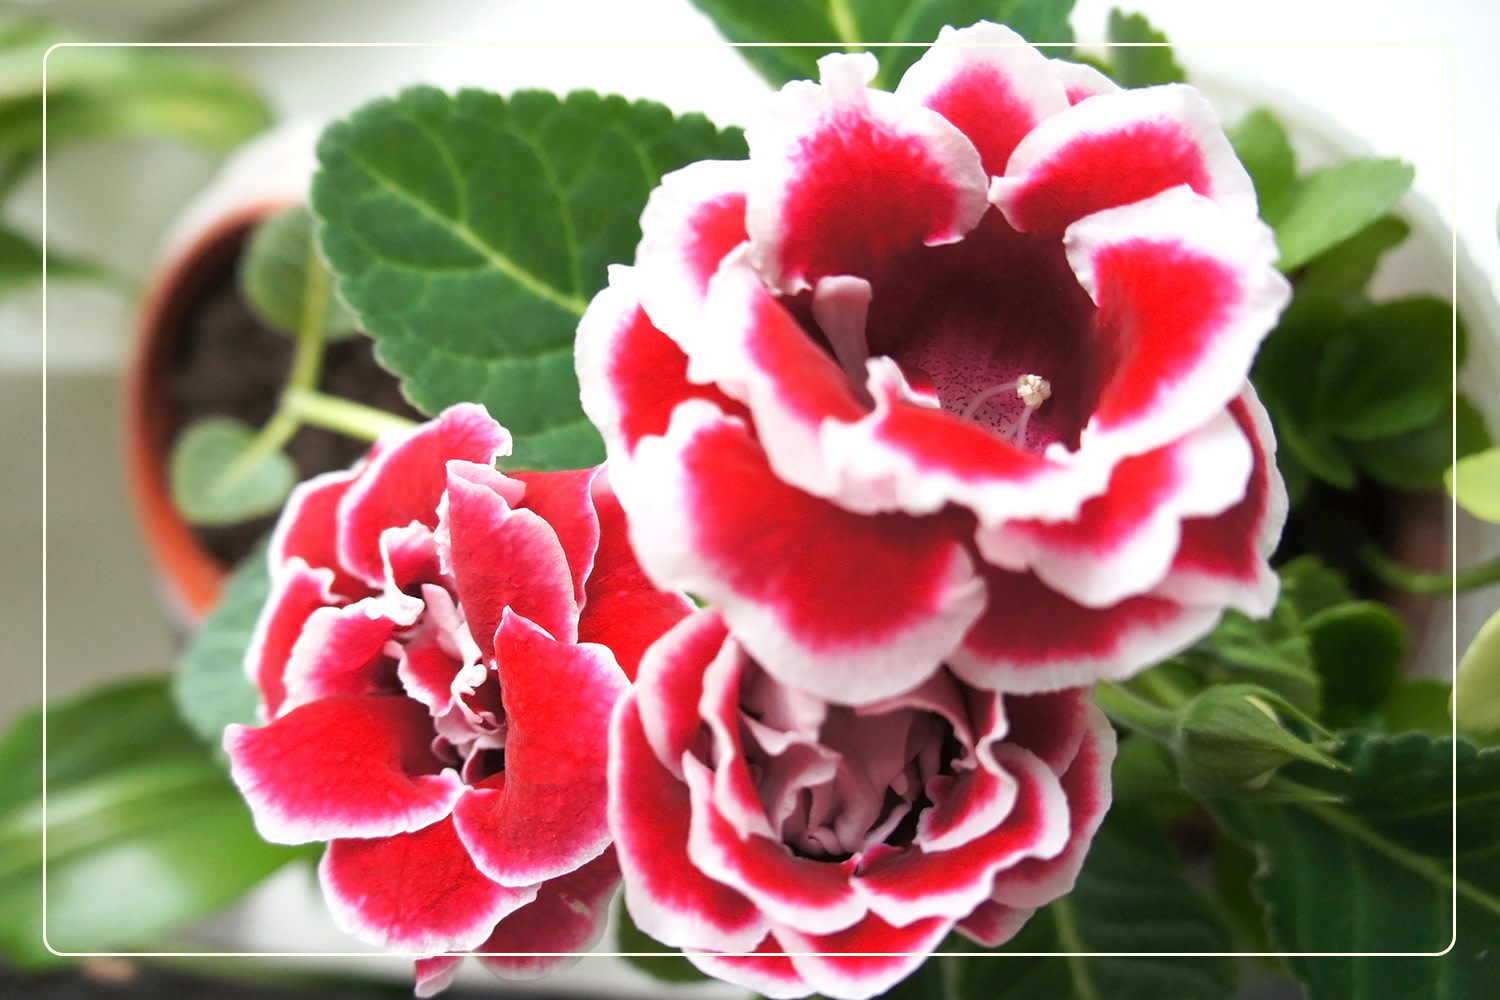 a red Gloxinia (Sinningia speciosa), which is a pet-friendly houseplant that flowers, grows indoors